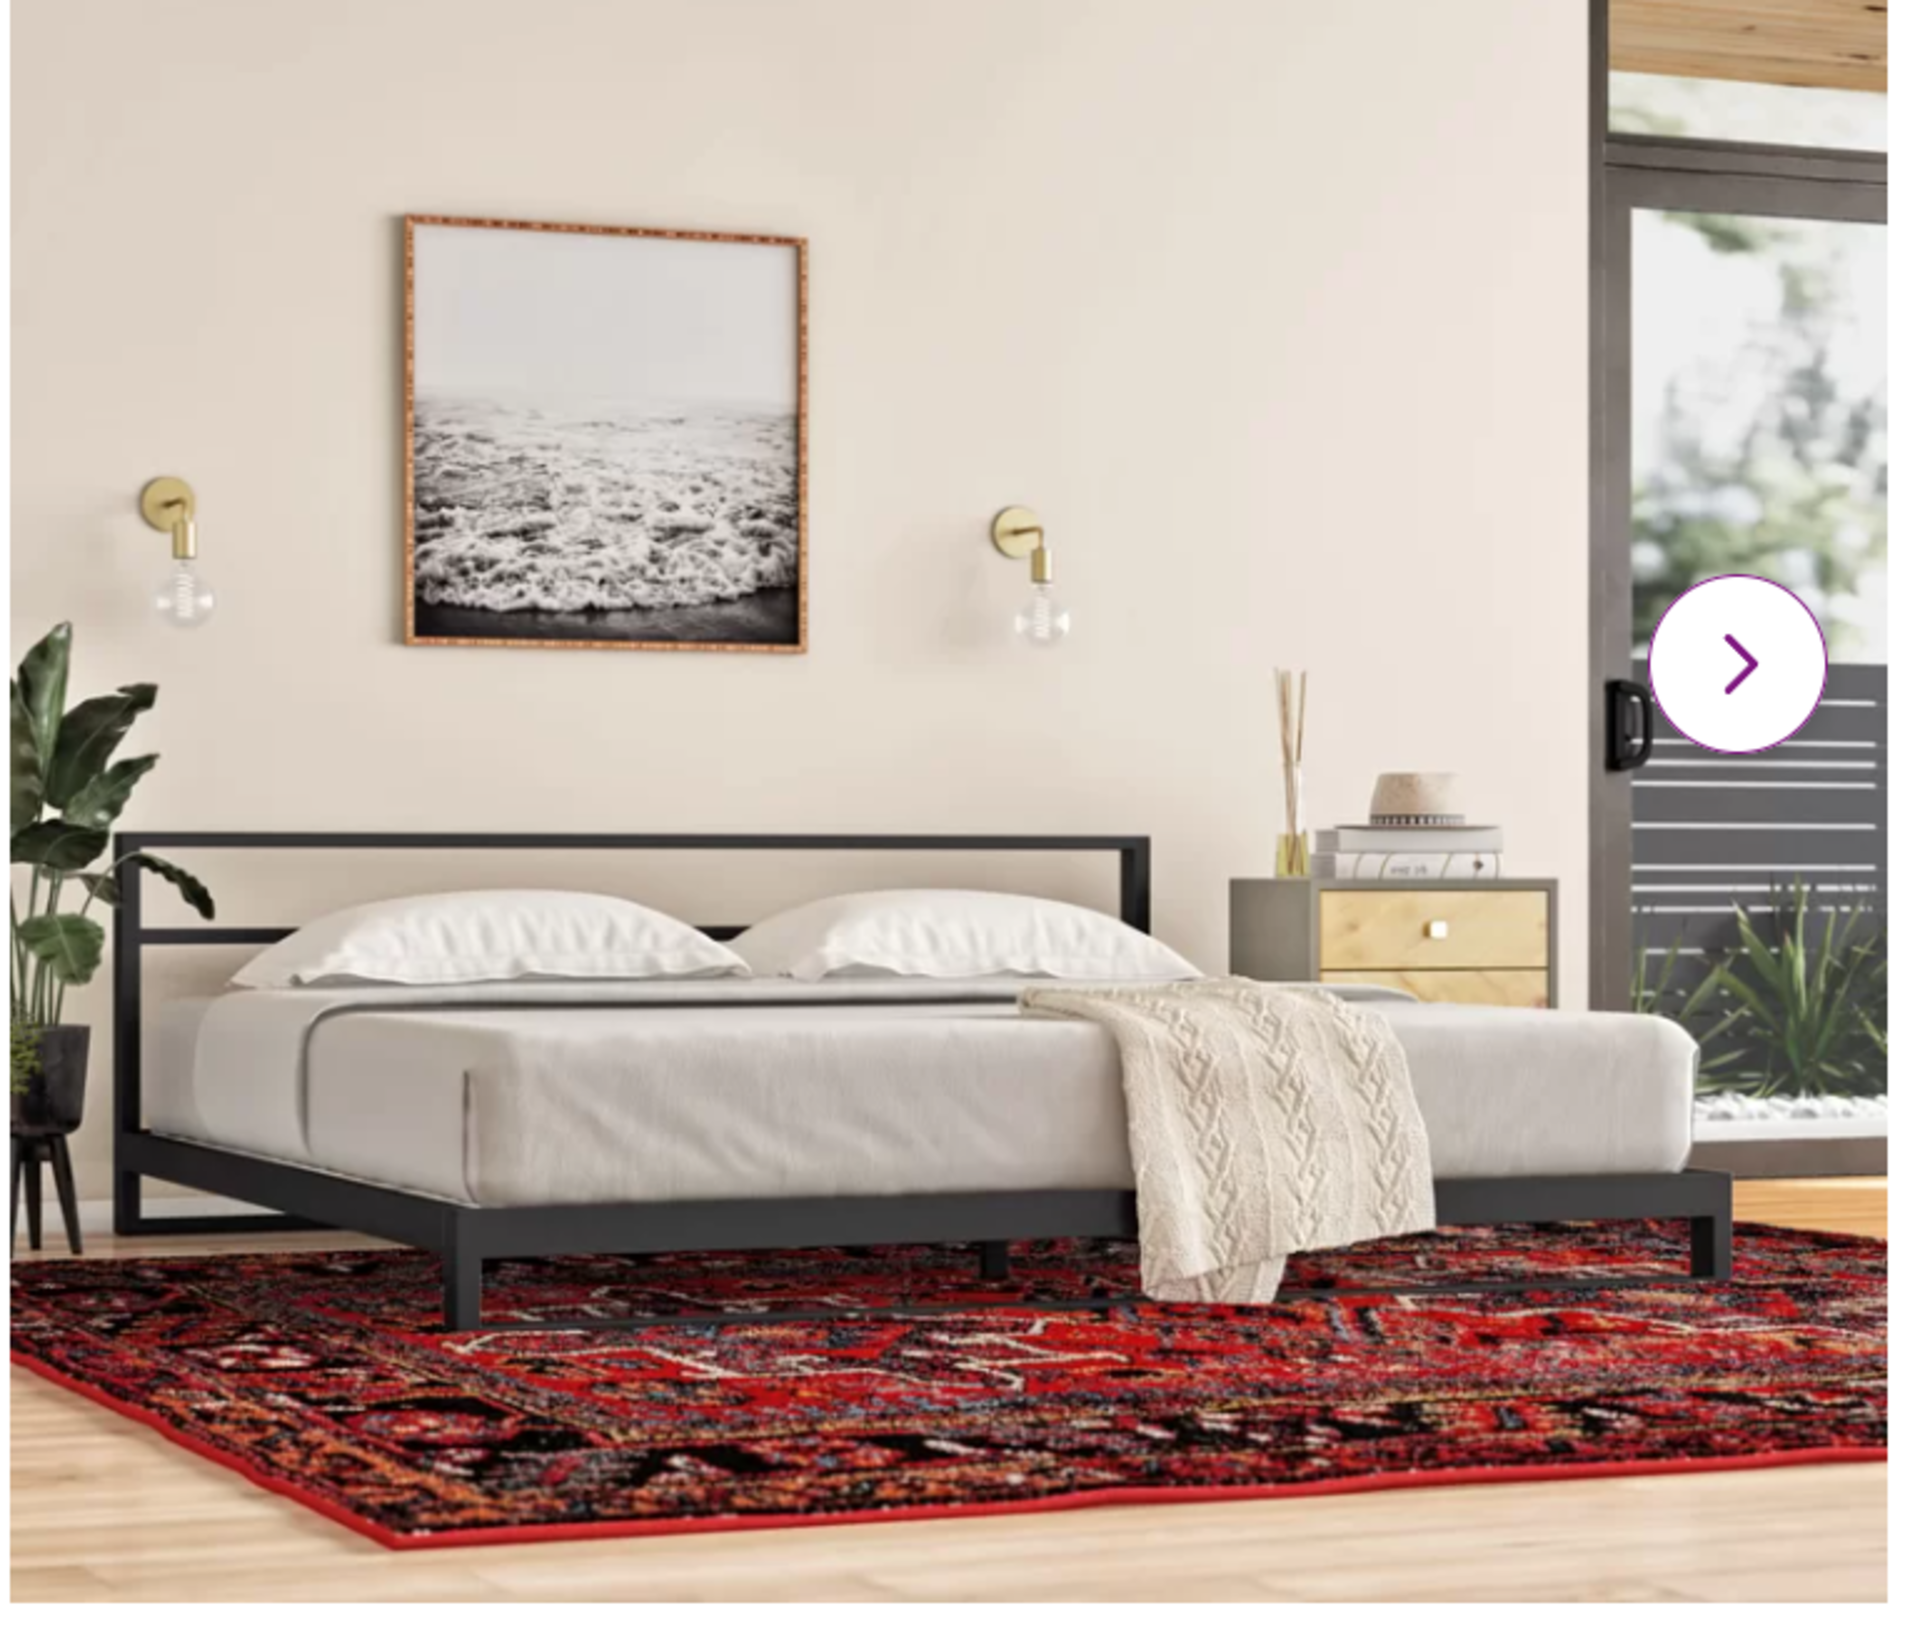 Rhoton Metal Bed. RRP £349.99. Super King. This minimalist bed frame offers the perfect basis for